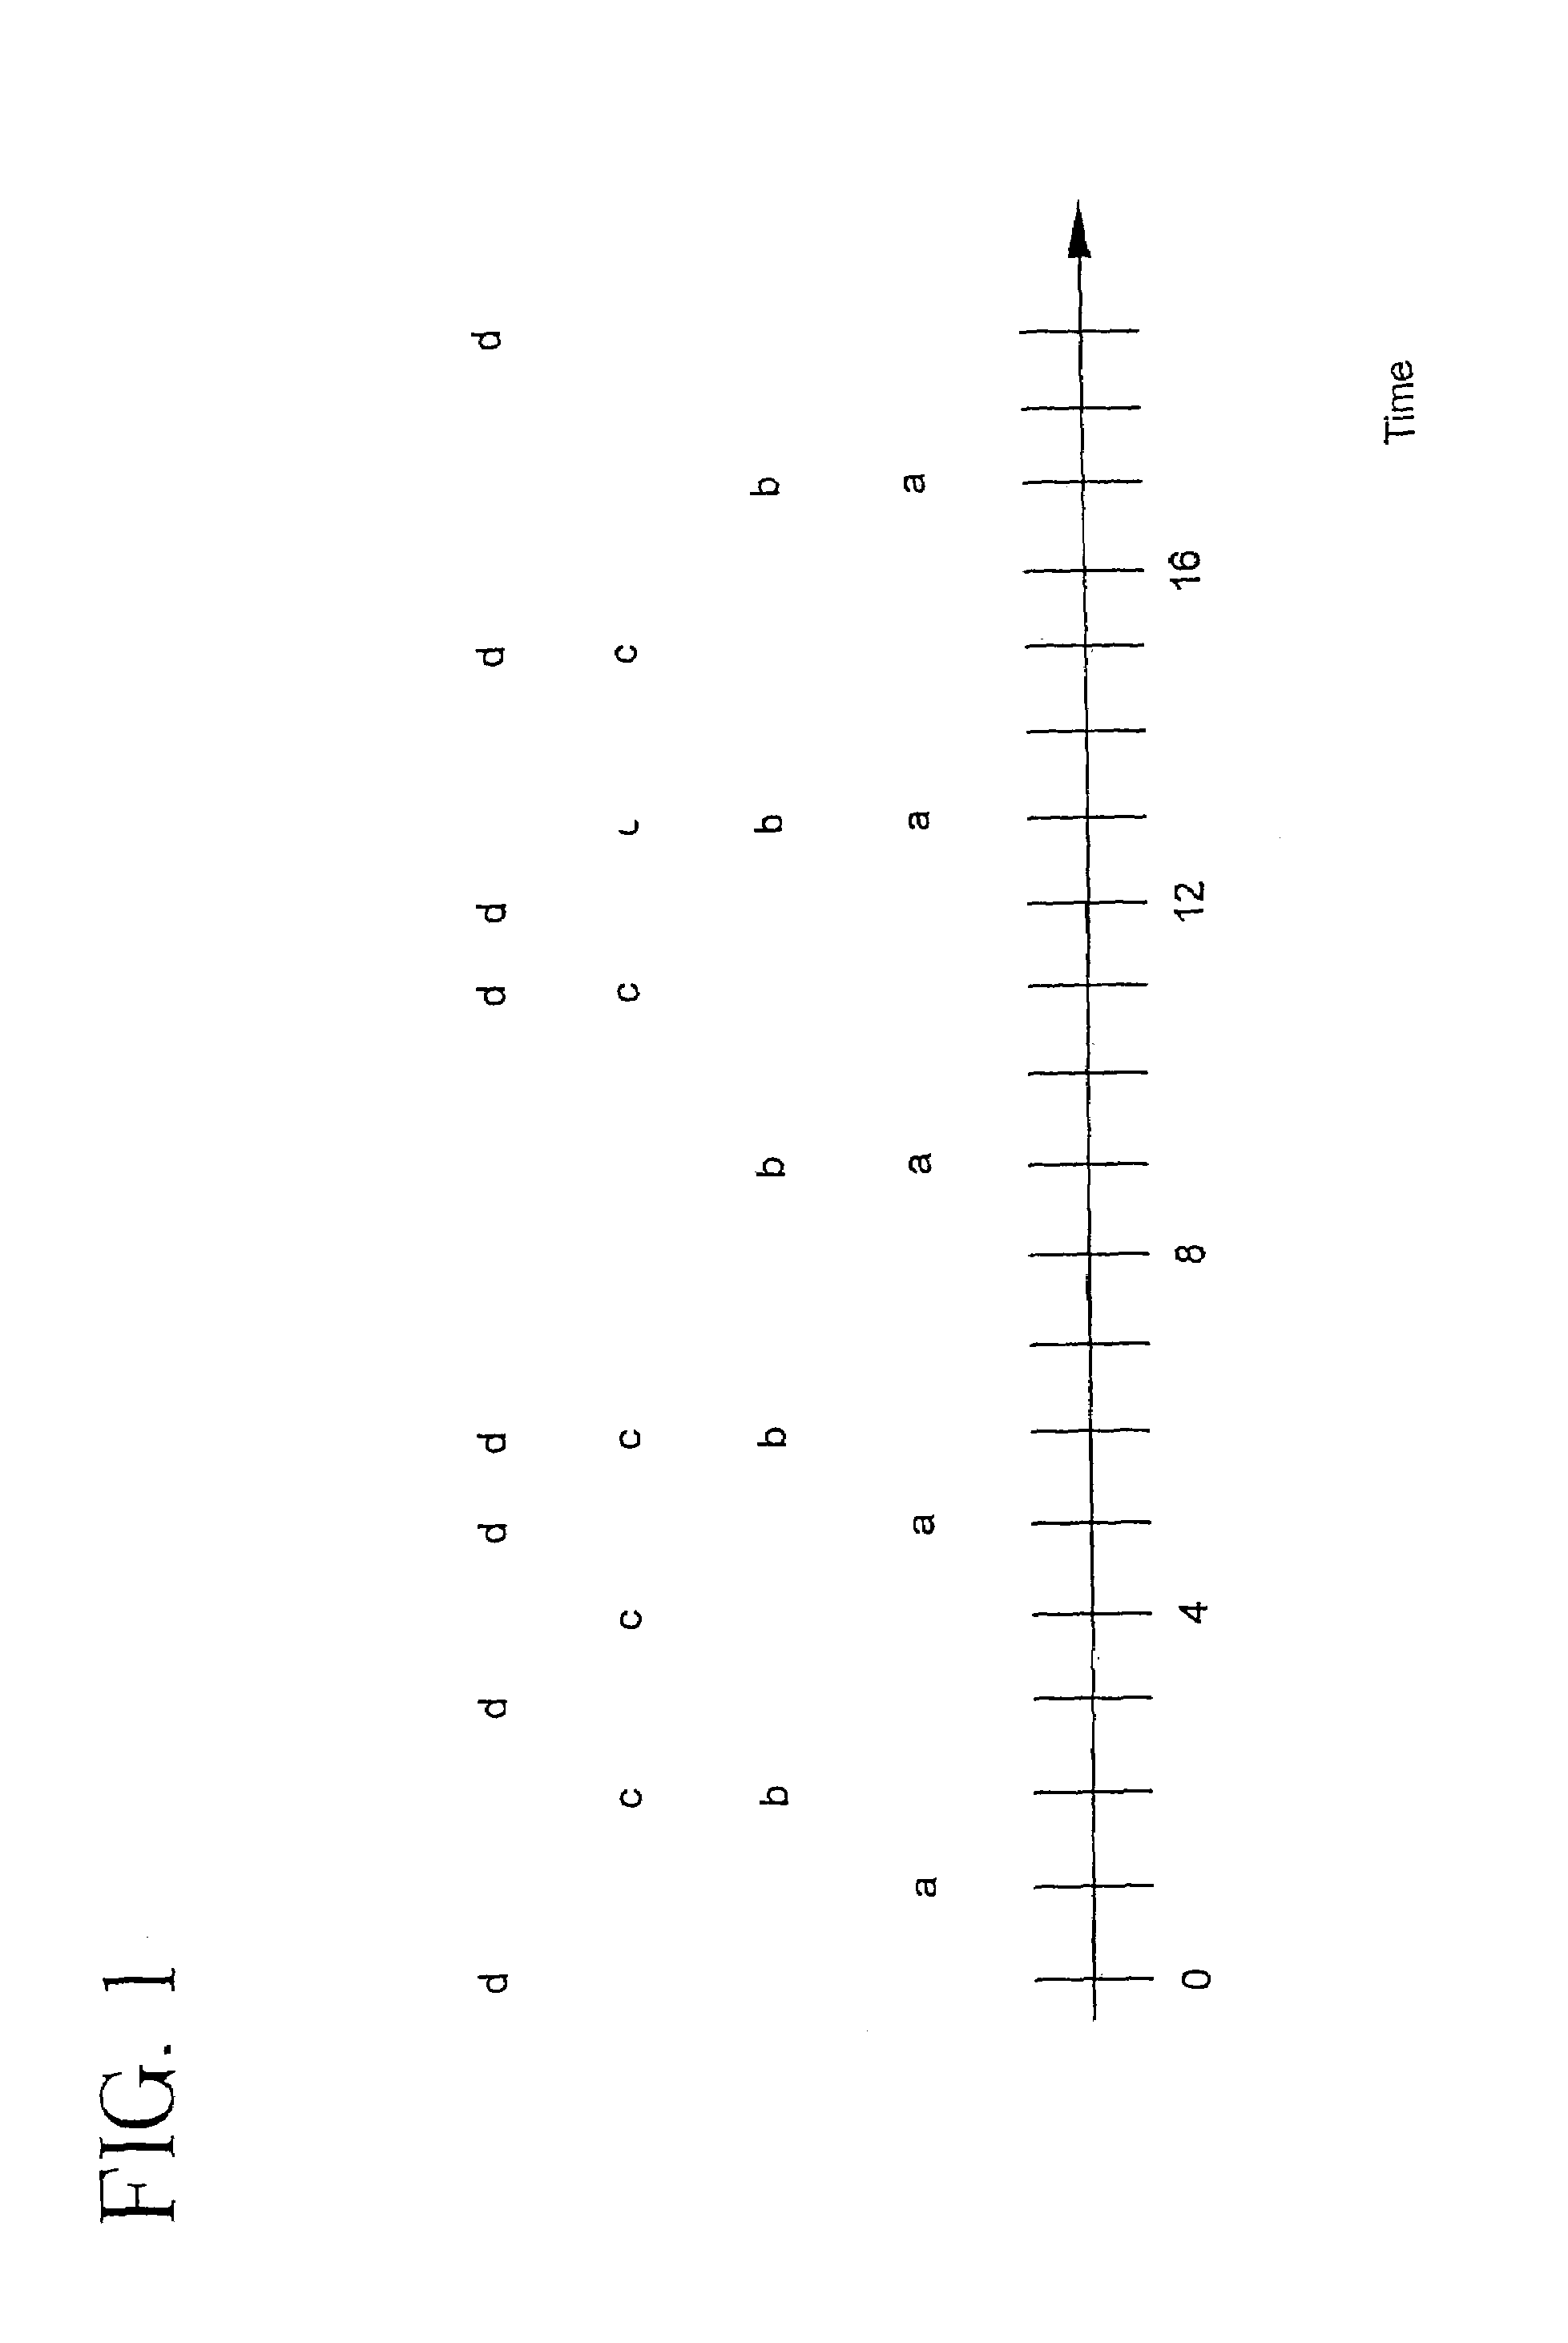 Apparata, articles and methods for discovering partially periodic event patterns